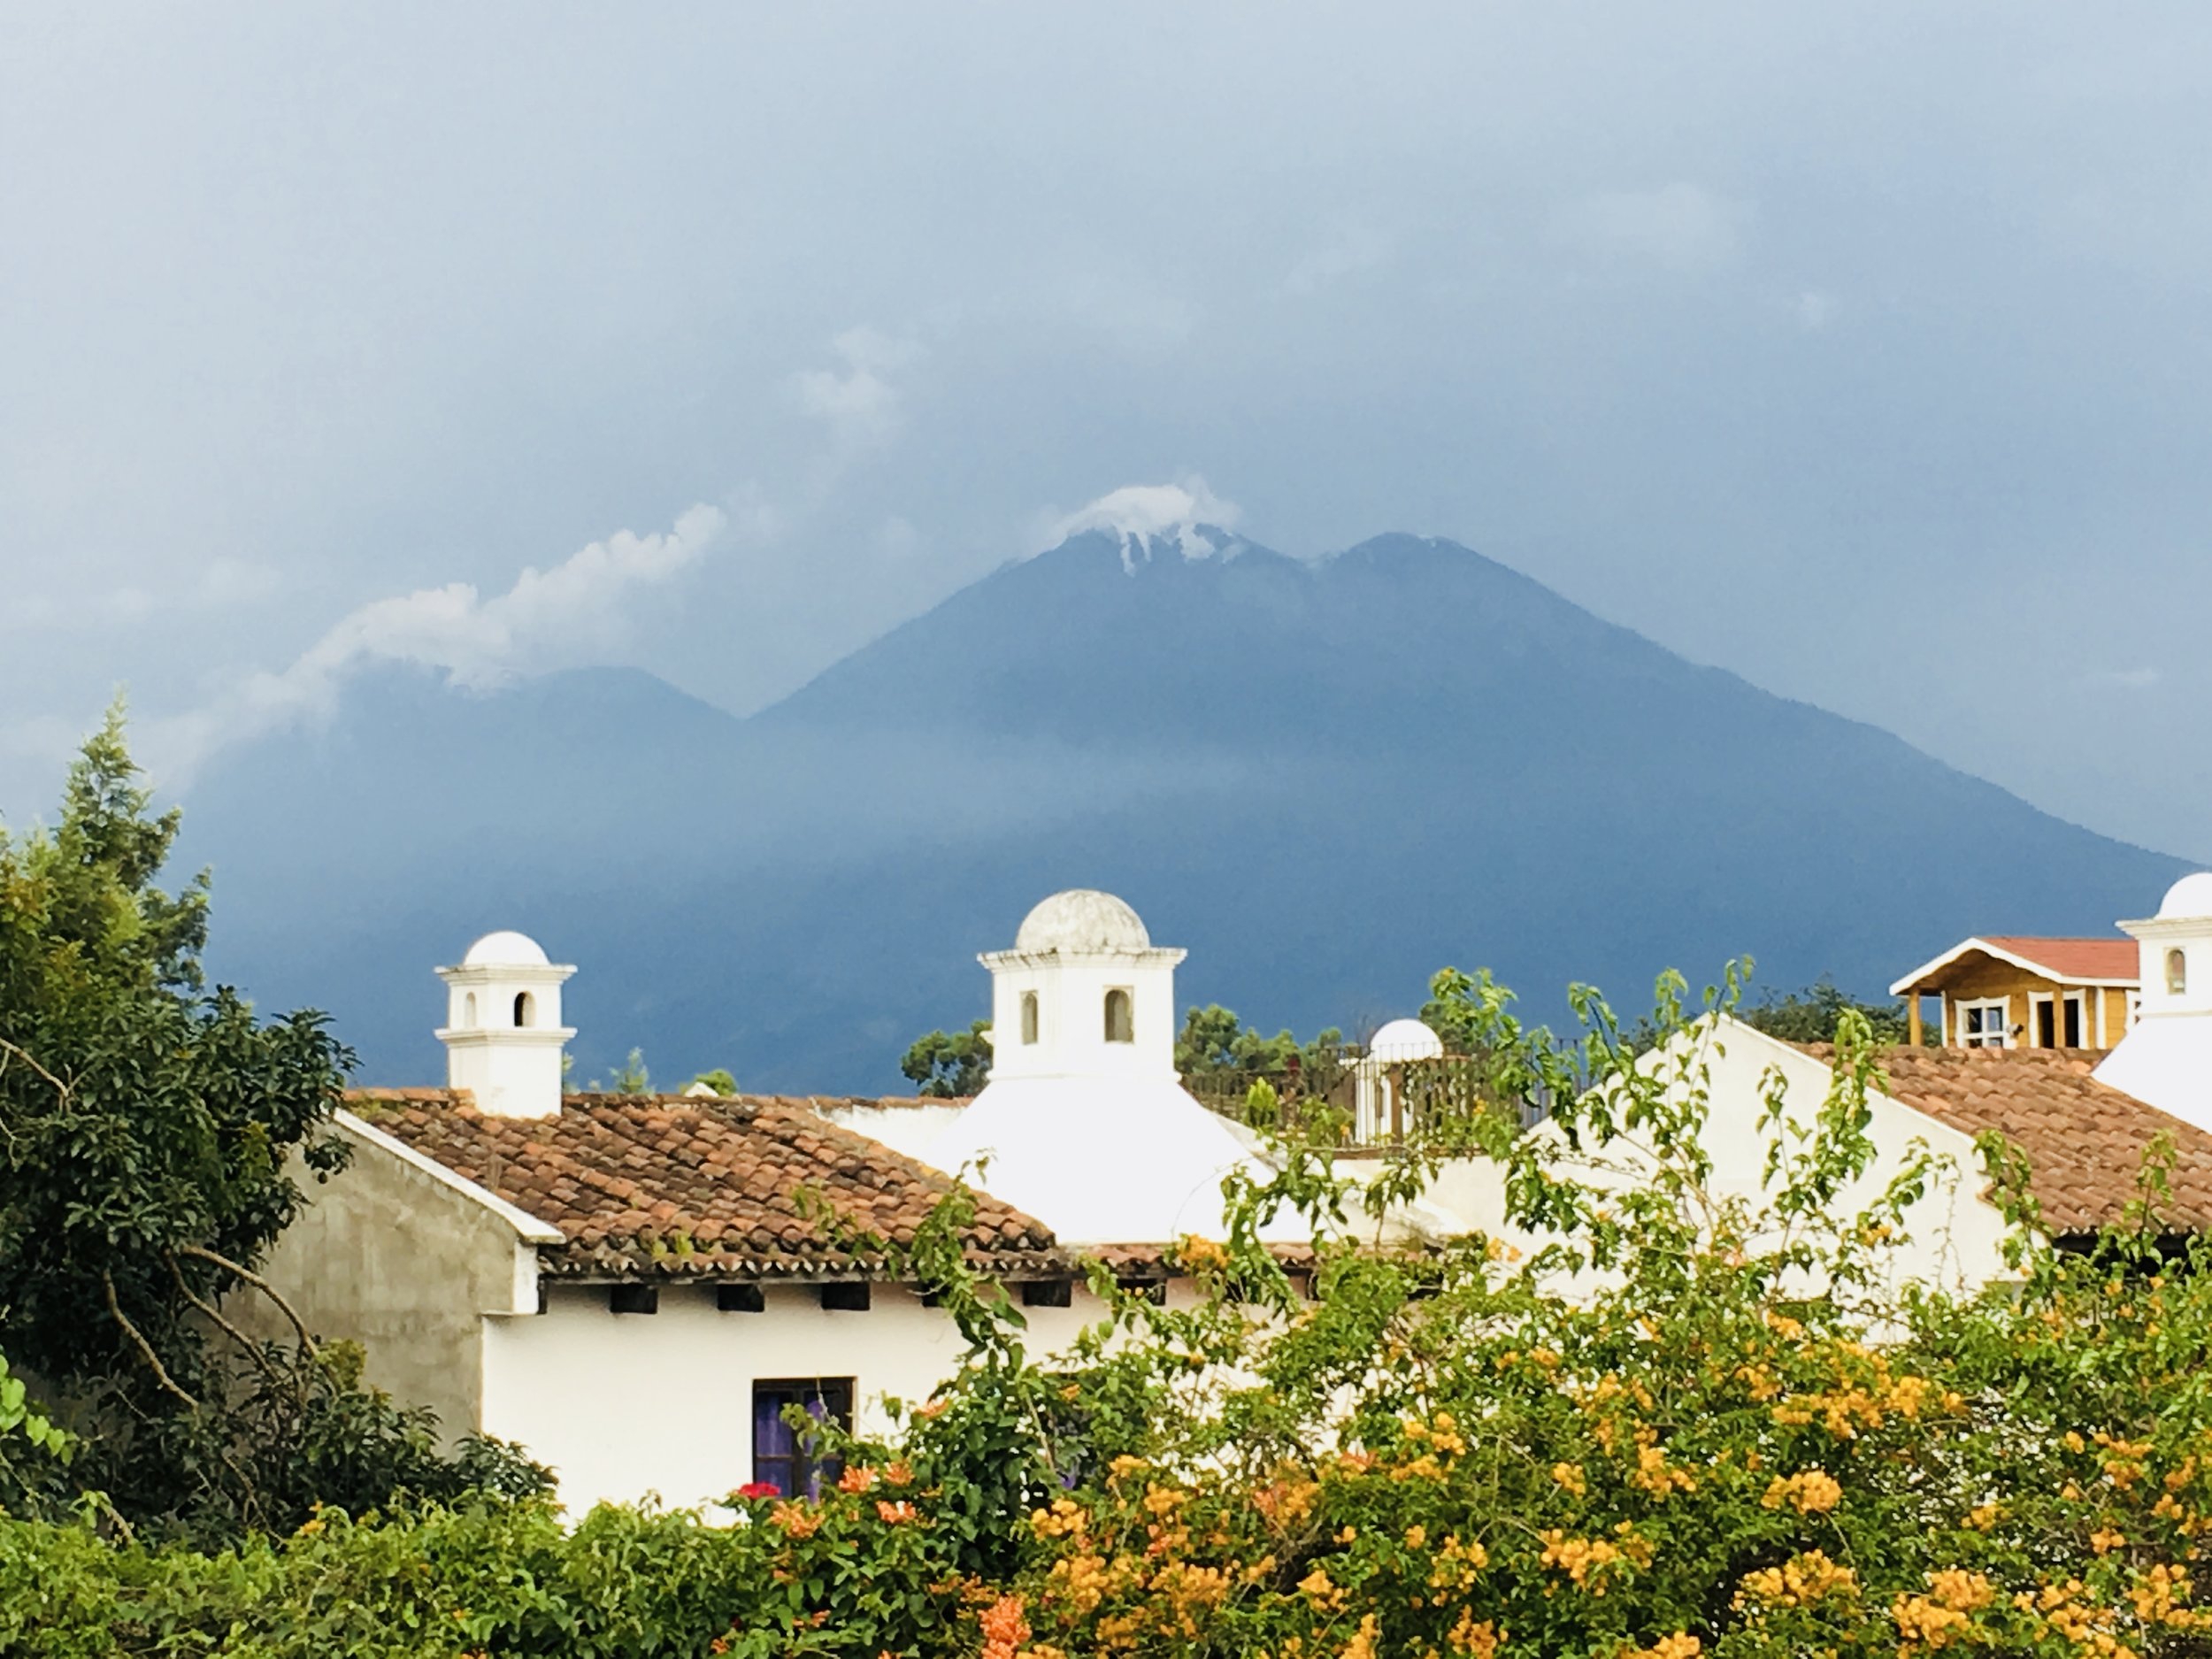 The view from the beautiful Common Hope campus in Antigua, Guatemala. 